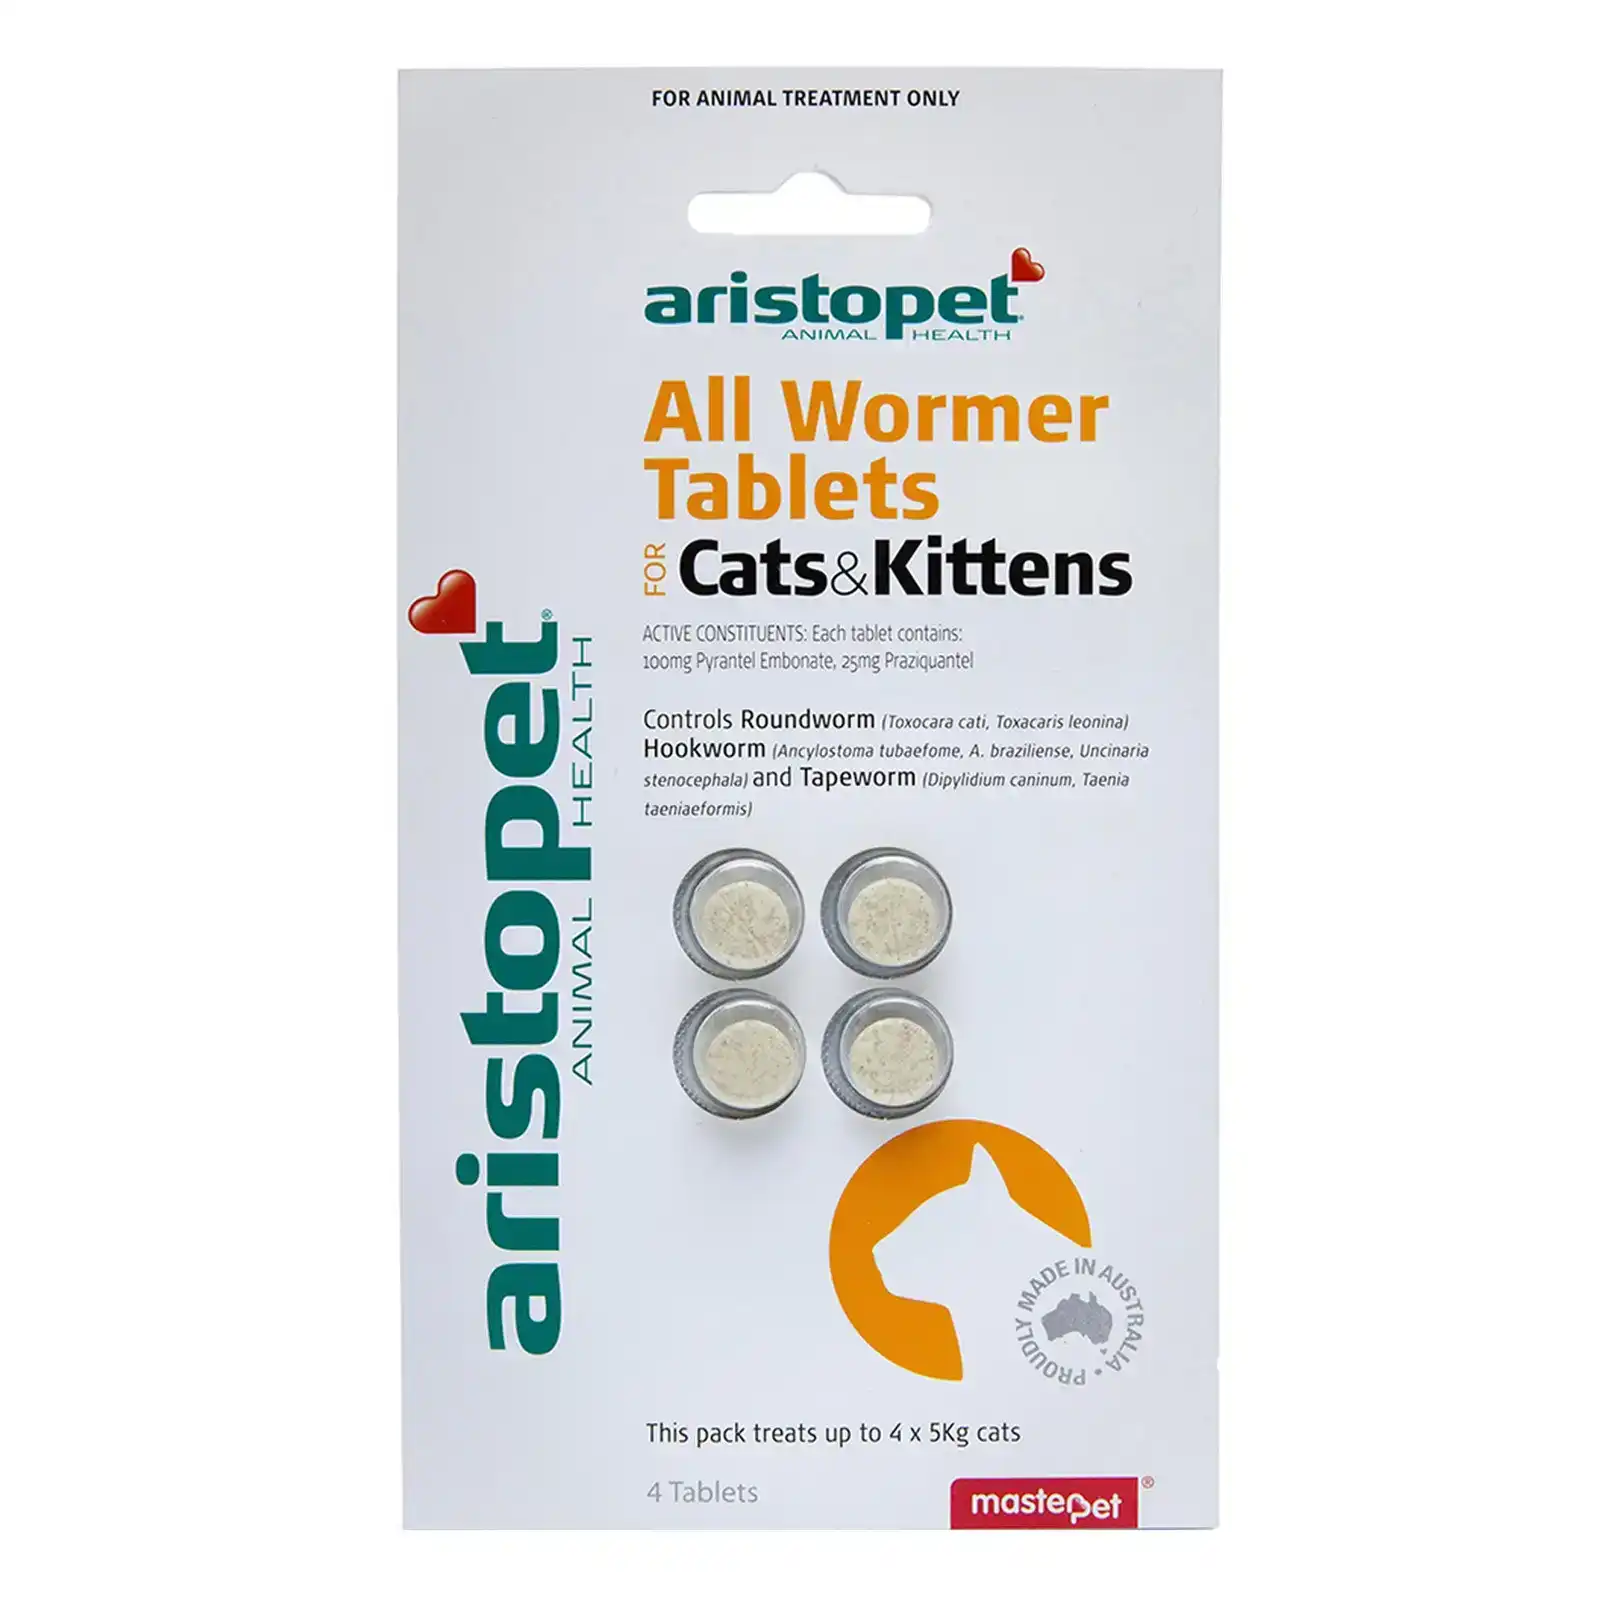 Aristopet Allwormer For Cats And Kittens 2 Tablets